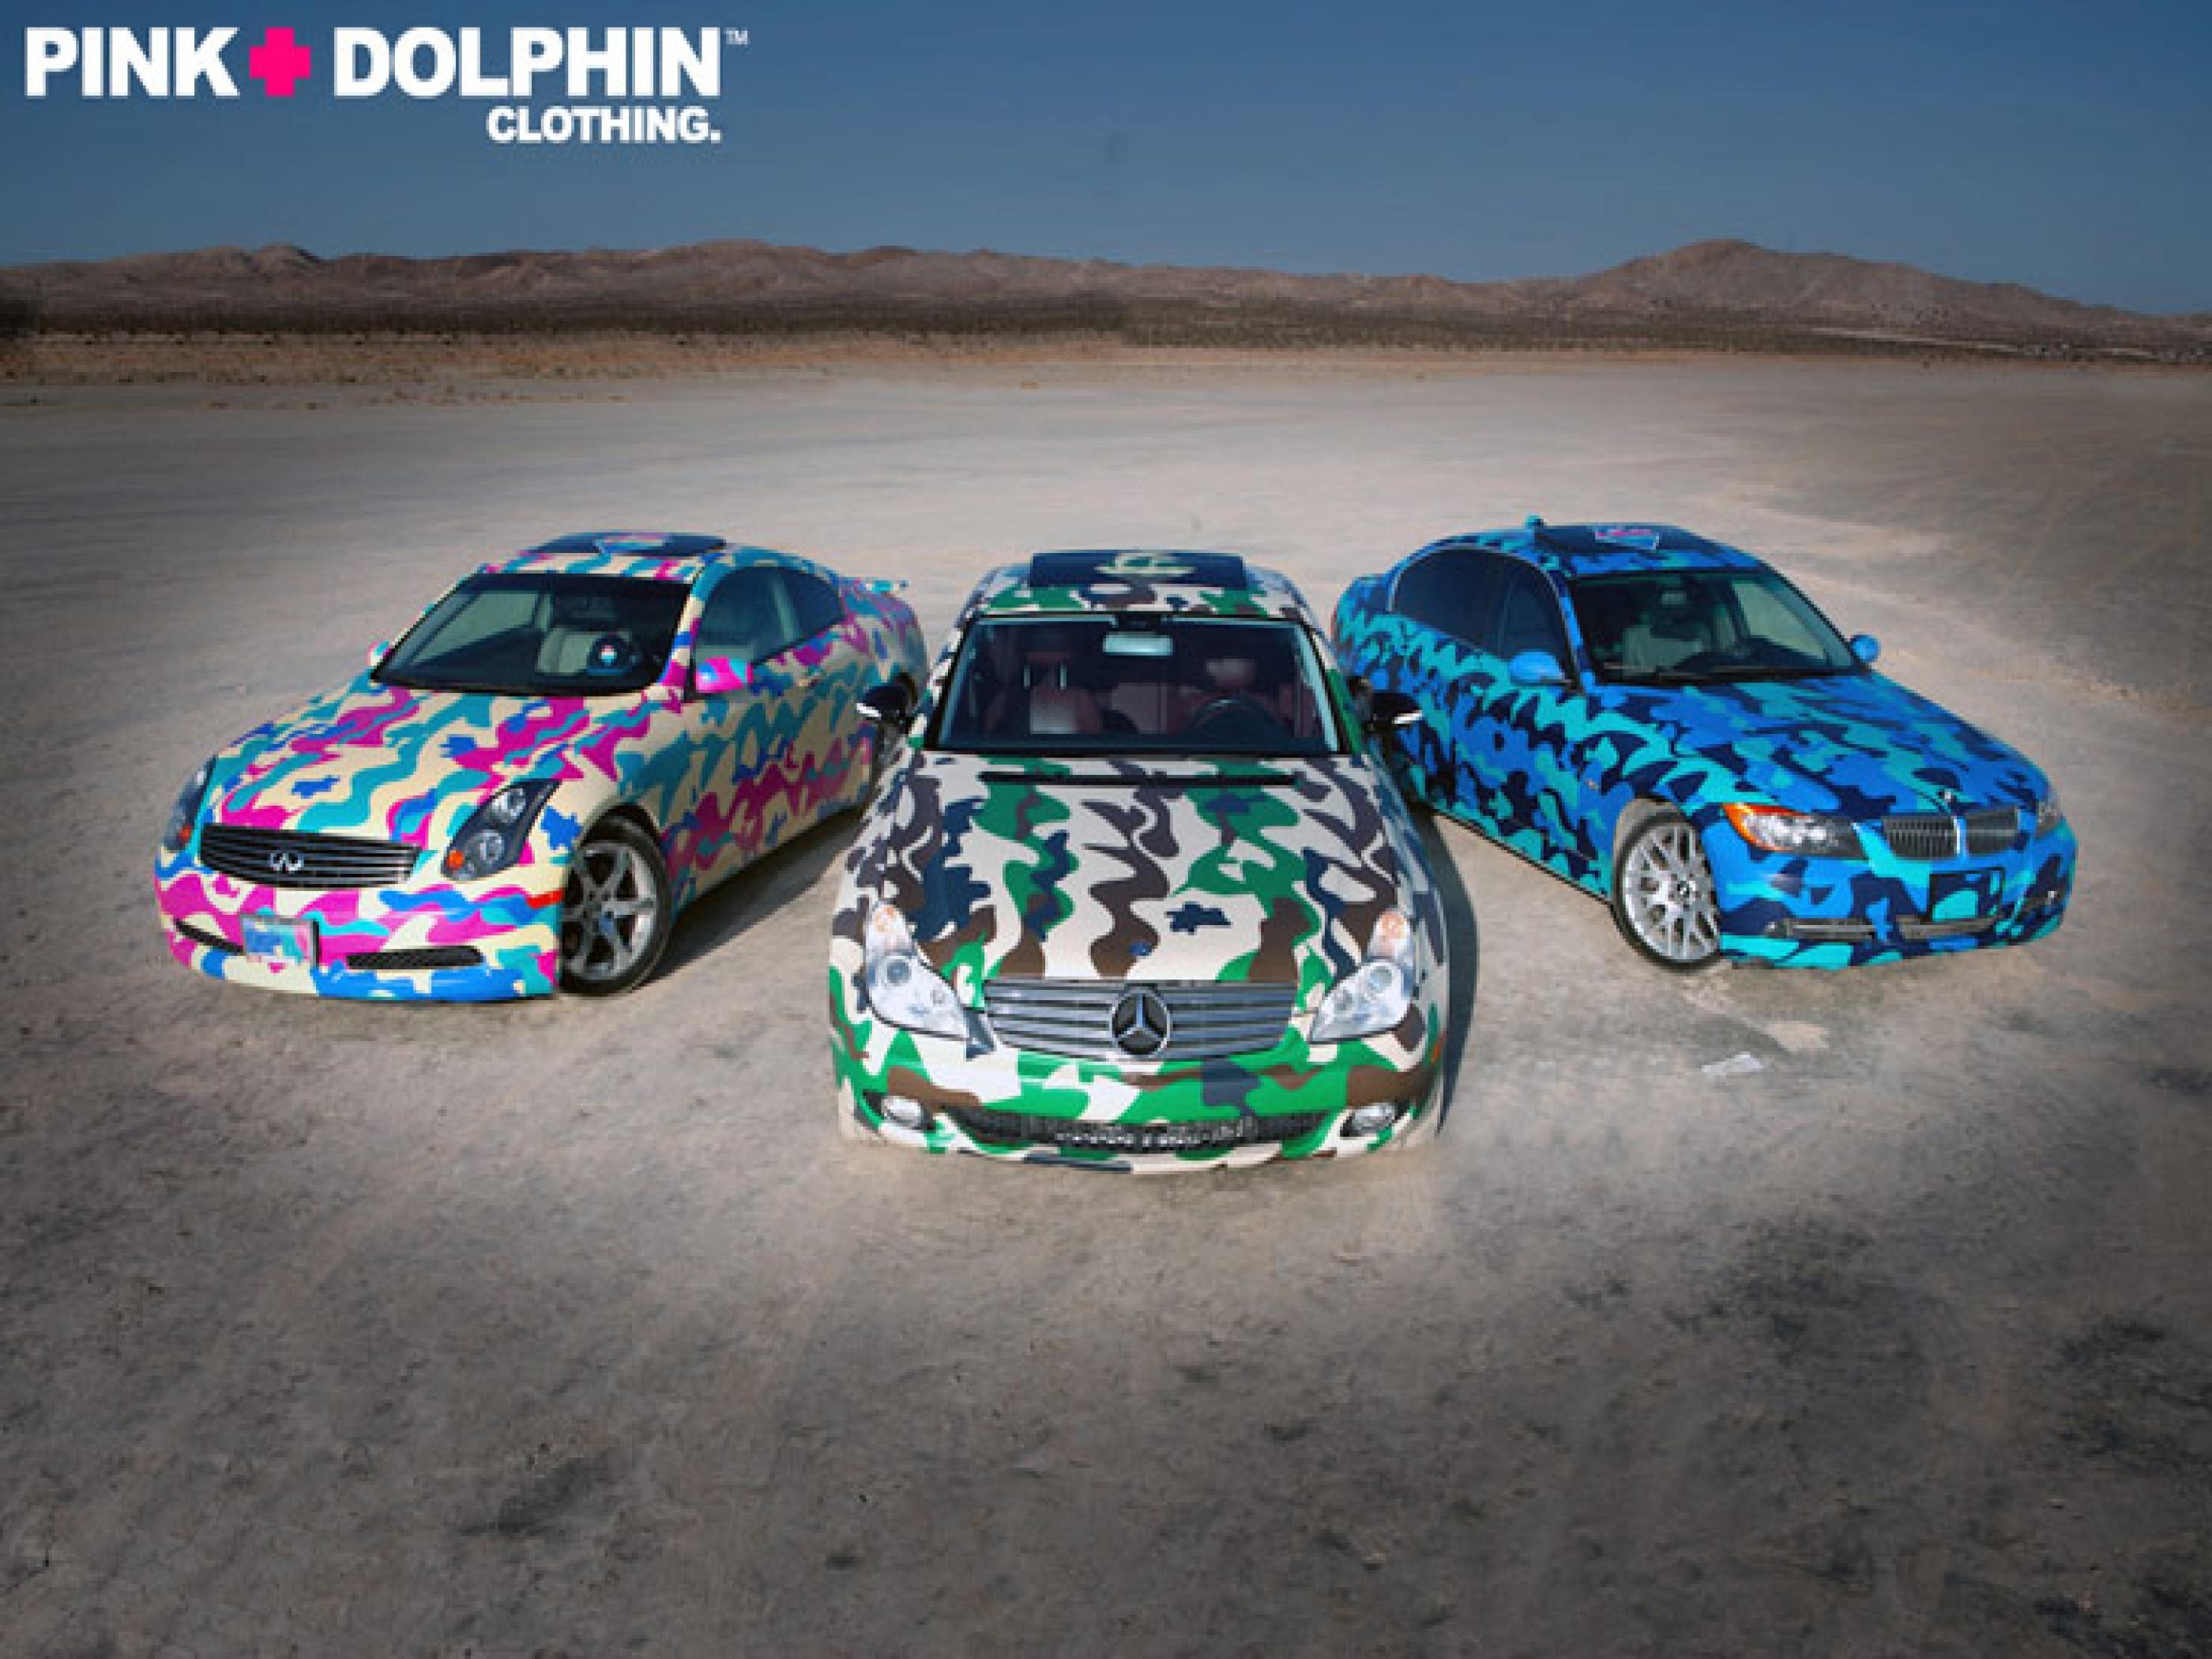 2800x2100 #884EH6V Pink Dolphin Clothing Wallpaper 728x486 | Wallimpex.com